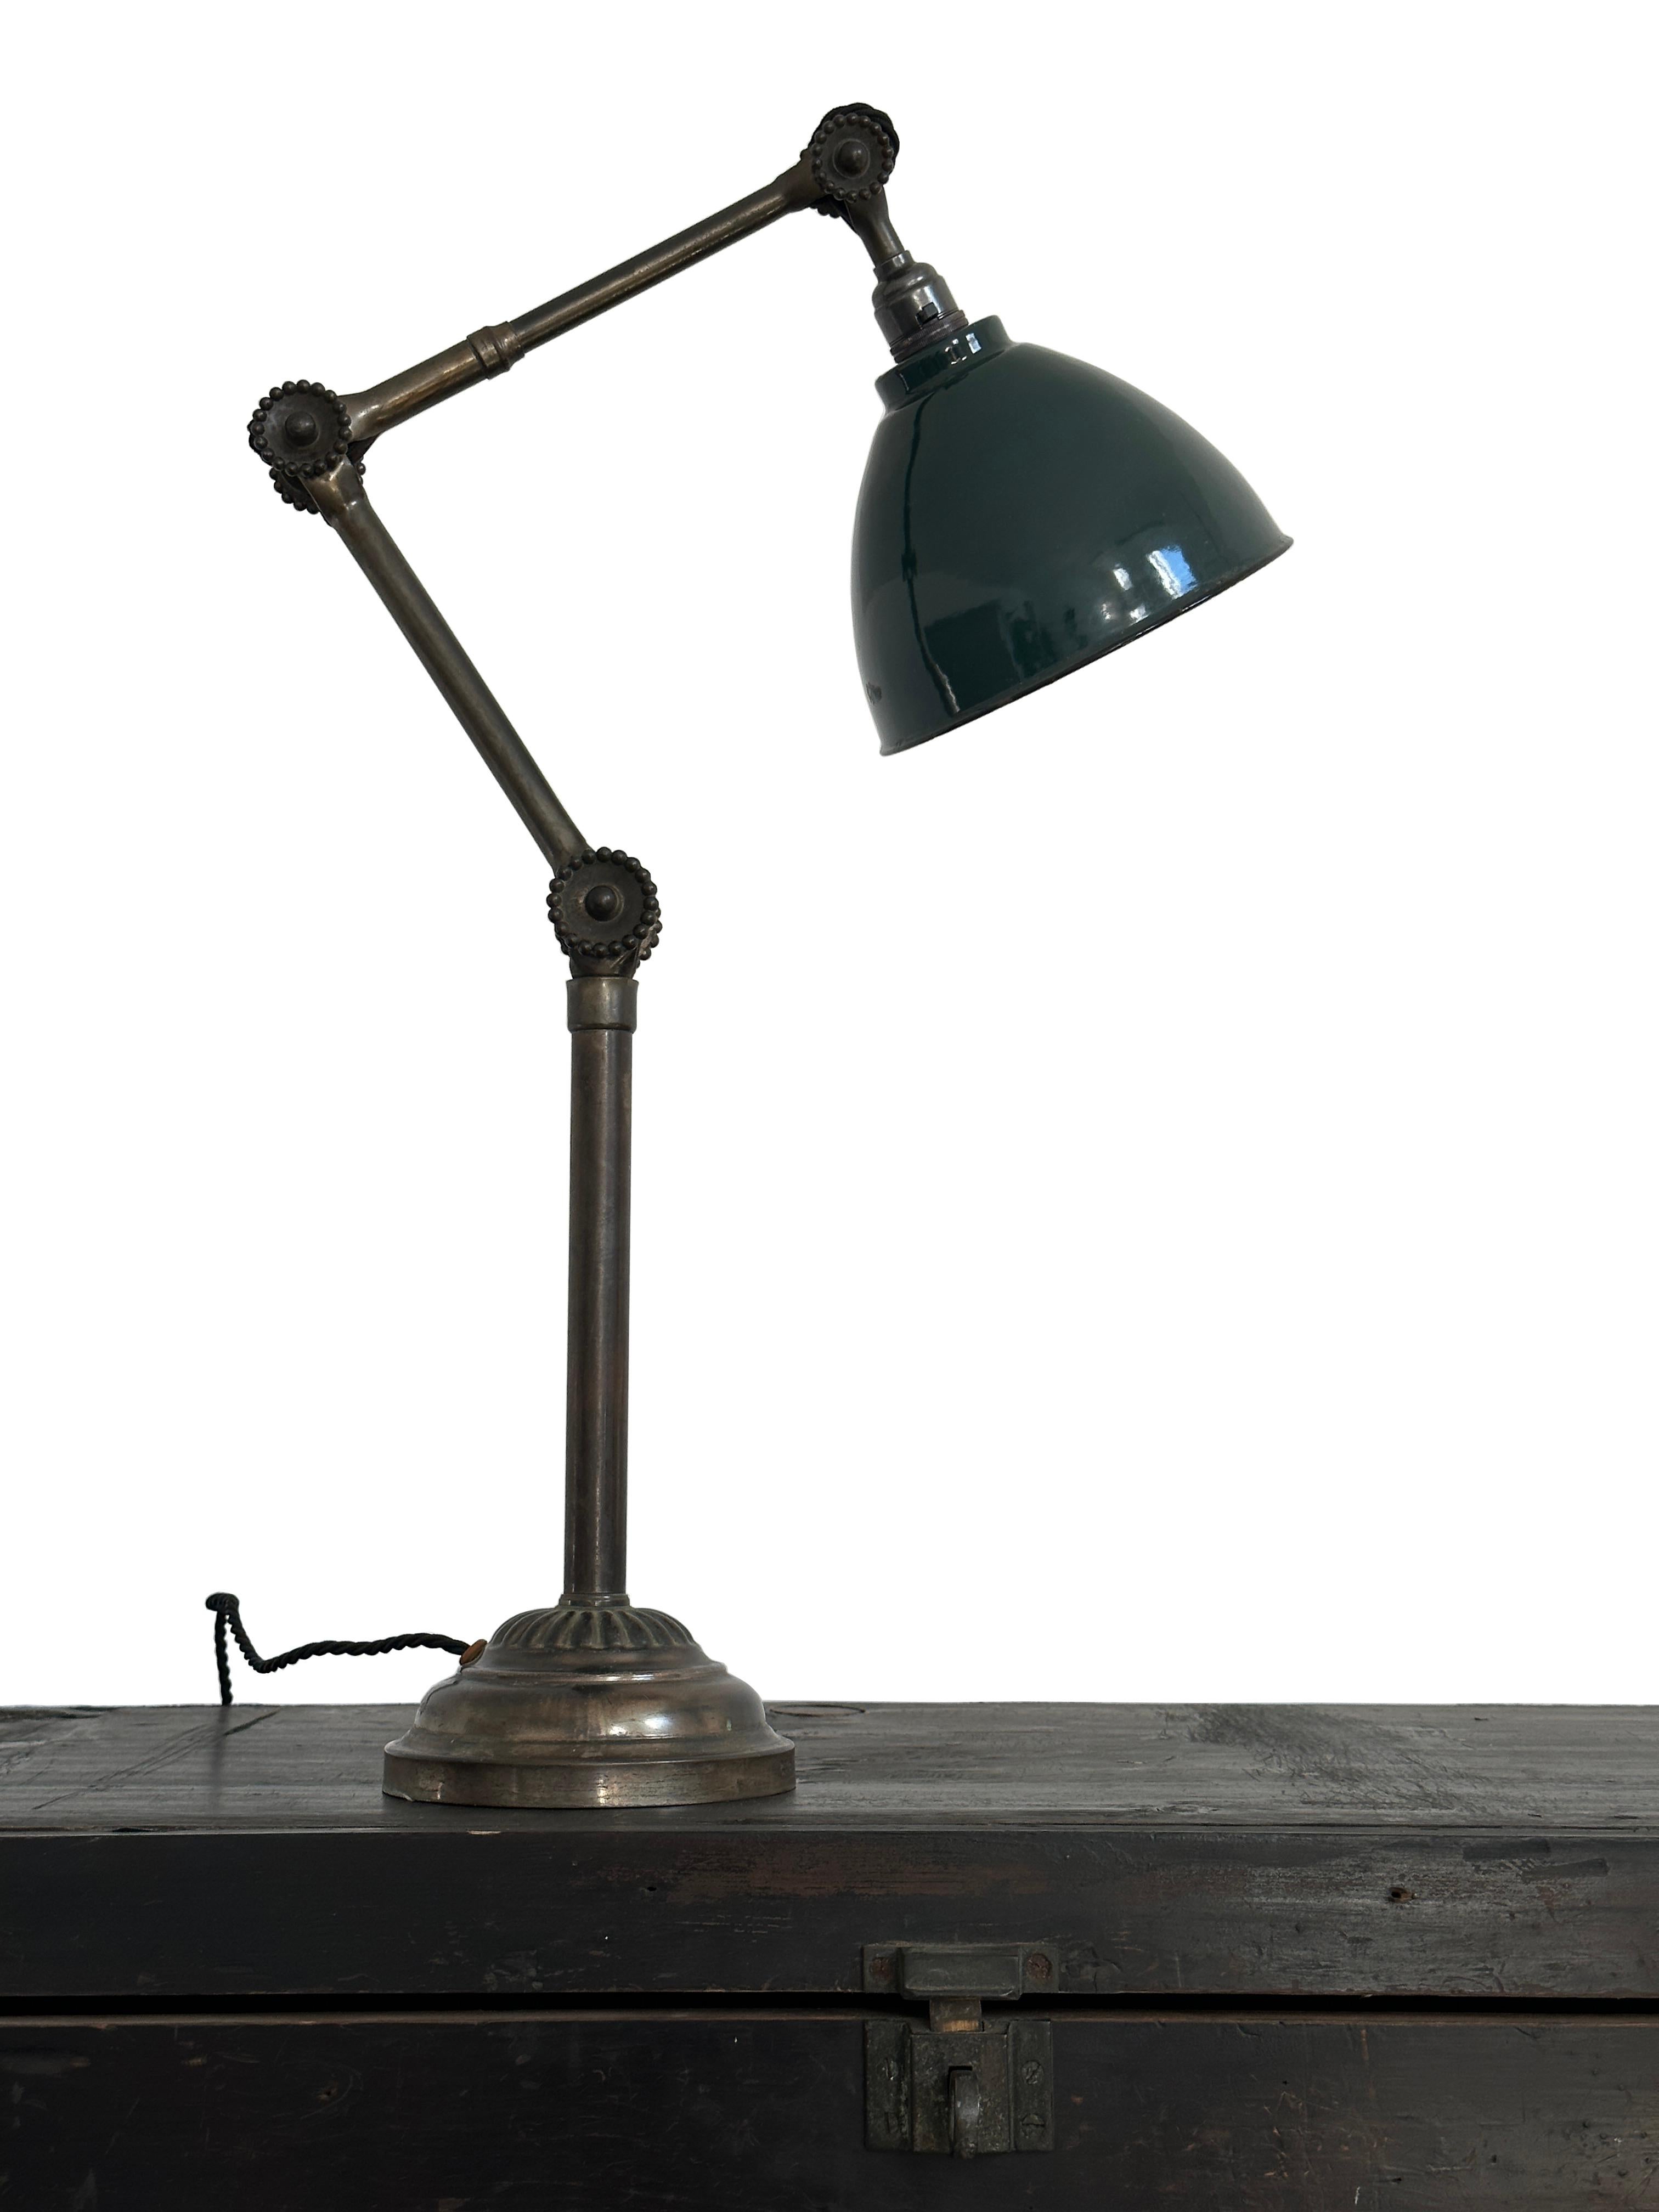 - A rare and early example of a brass daisy joint table lamp by the illustrious John Dugdill, circa 1920.
- This scarce lamp features the trademark 'daisy head’ joints in three places for tightening the arm and head, an aged worn original deep